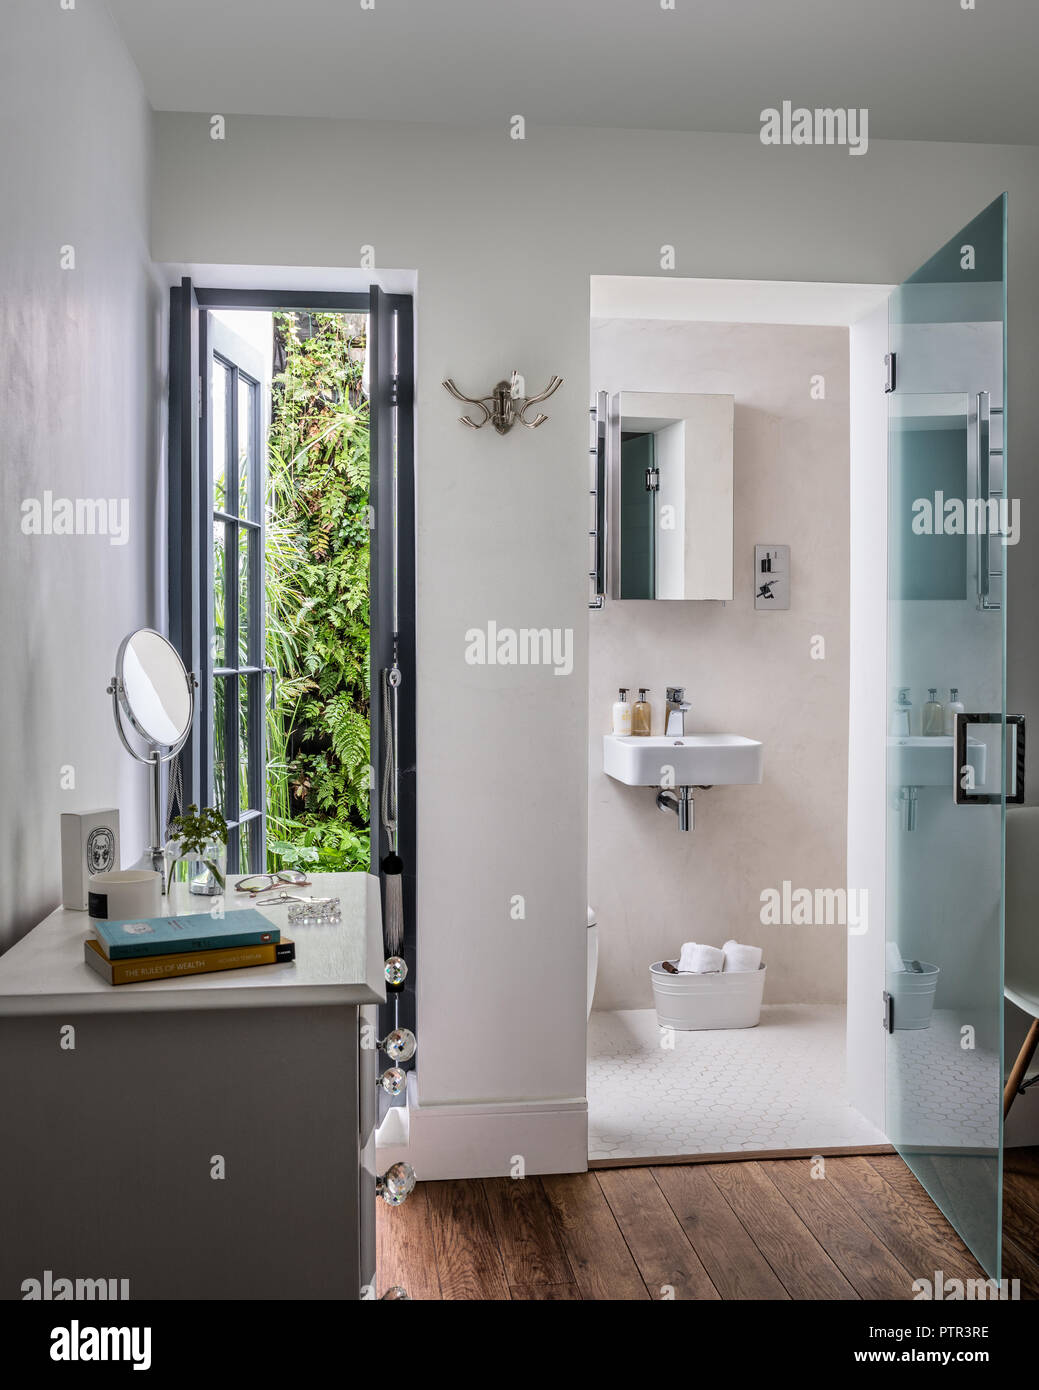 Ensuite bathroom with mirrored cabinet and frosted glass door Stock Photo